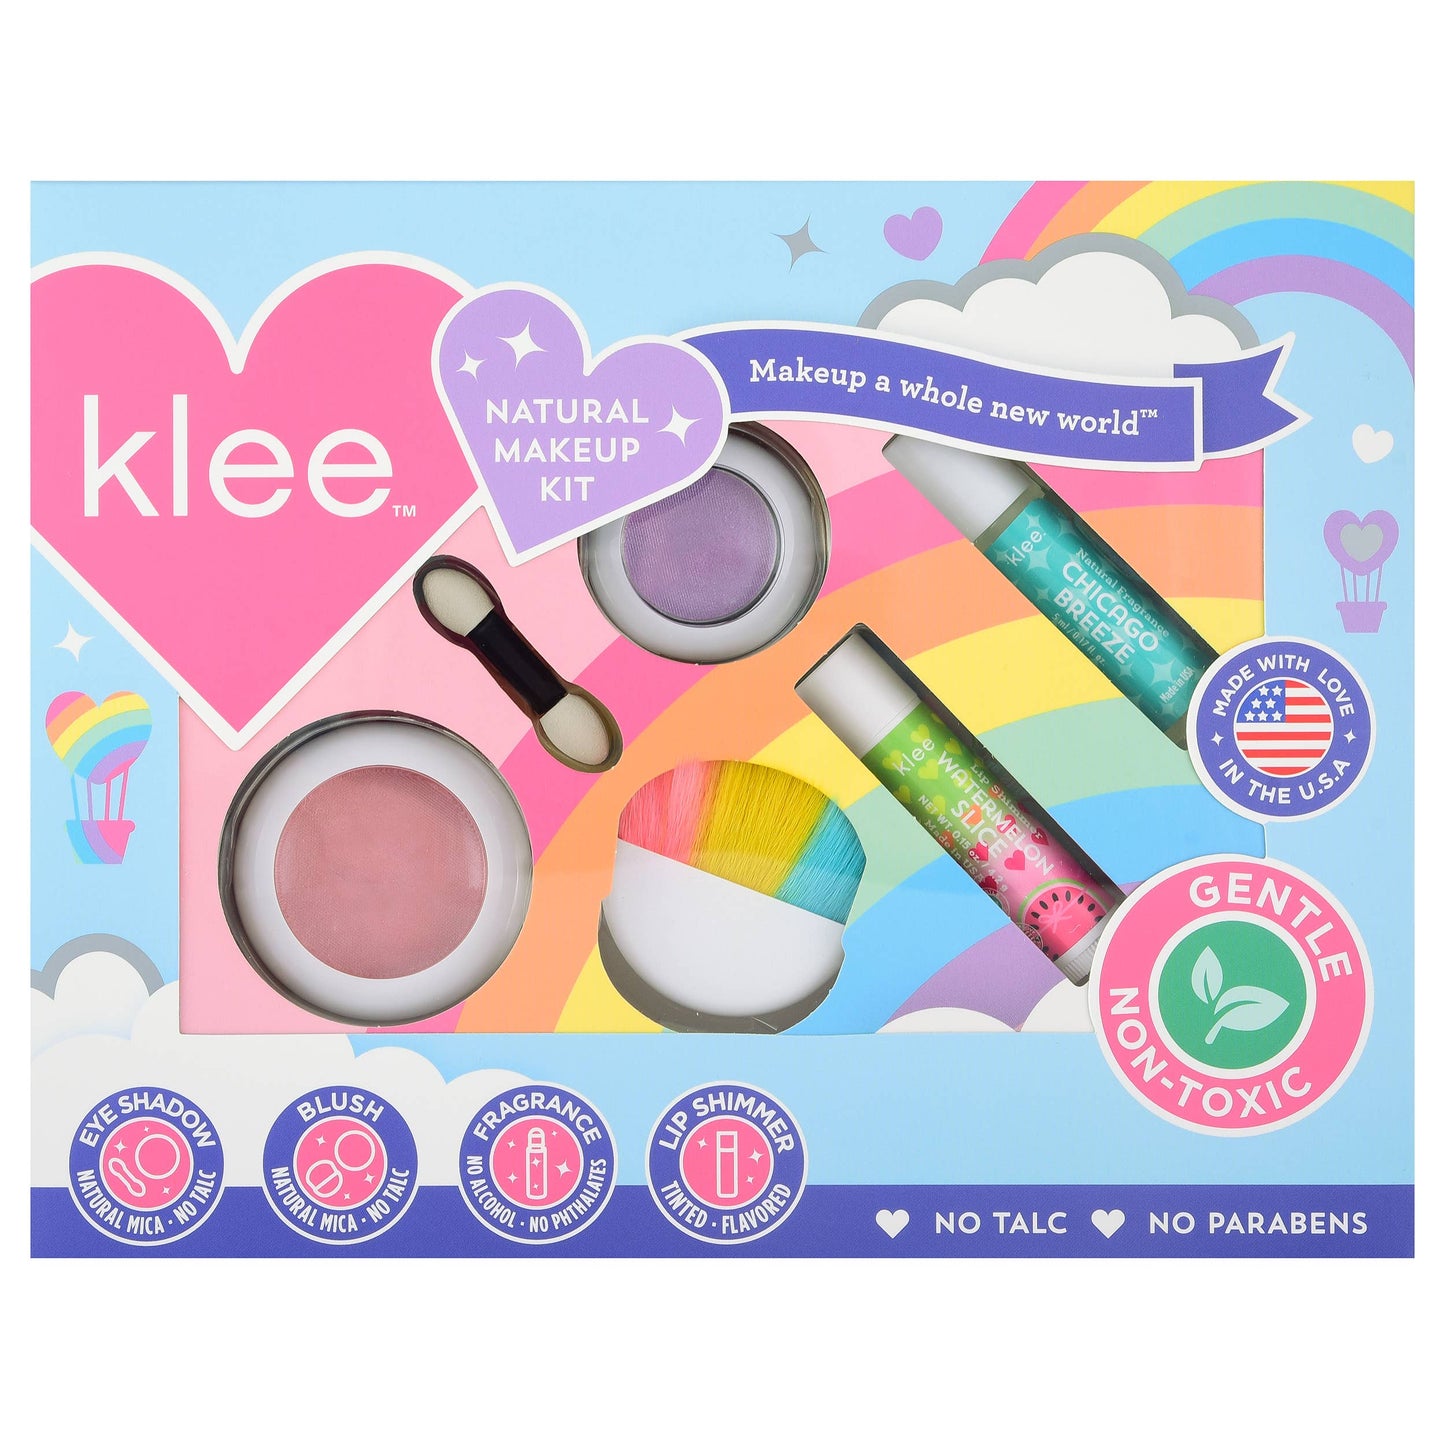 NEW! Sun Comes Out - Rainbow Dream 4-PC Makeup Kit: After the Rain